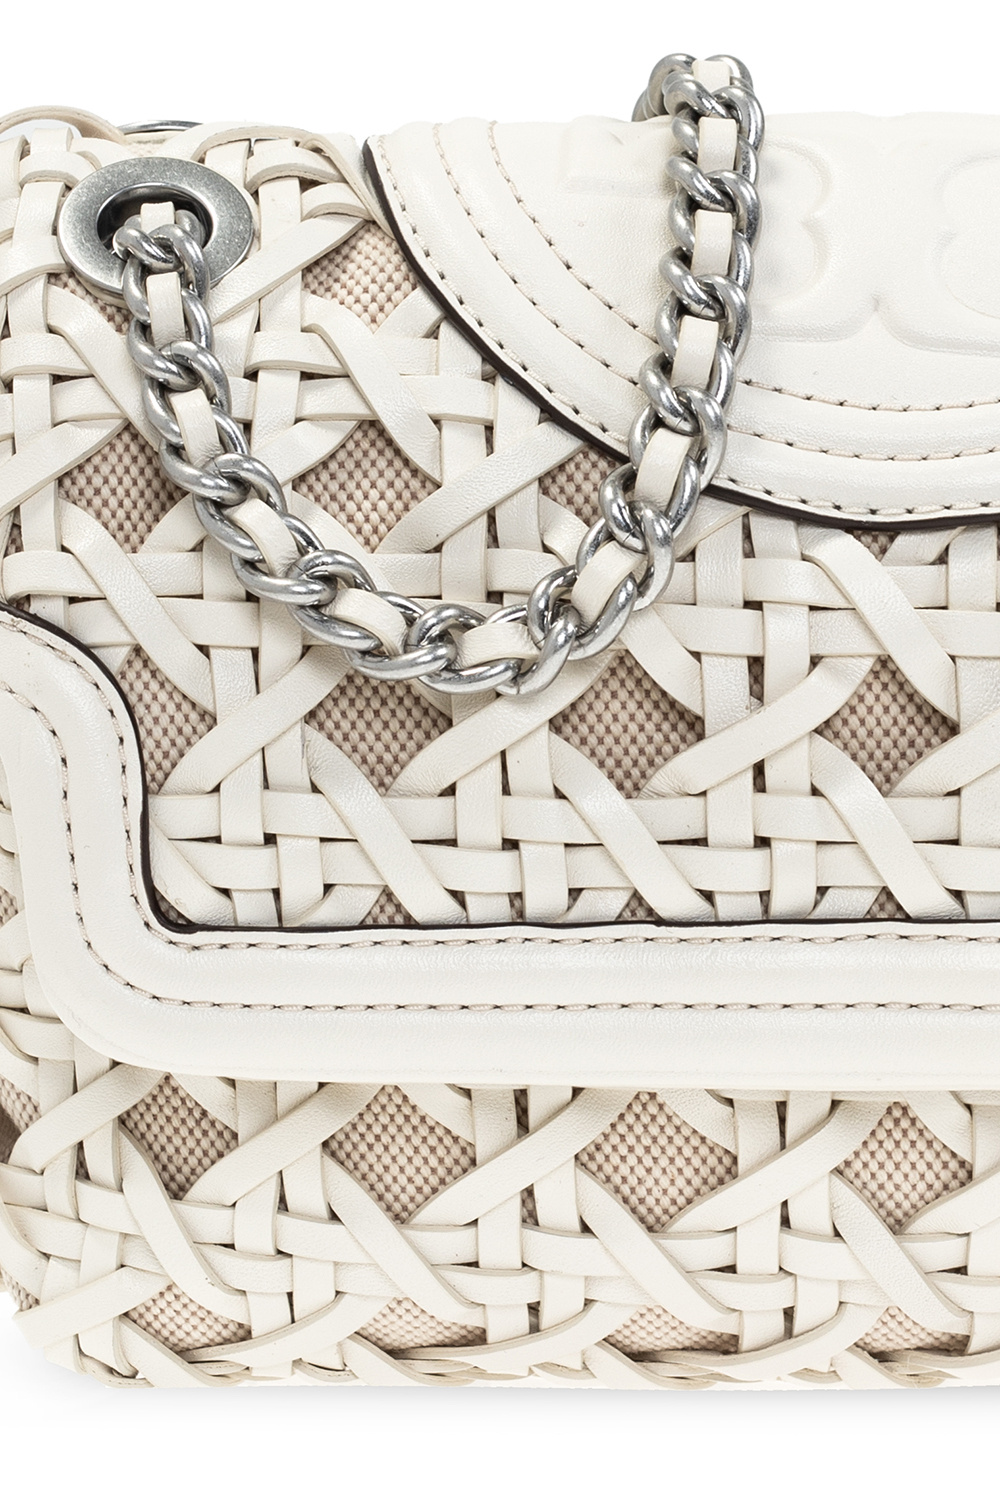 Tory Burch White Fleming Bouclé Quilted Shoulder Bag